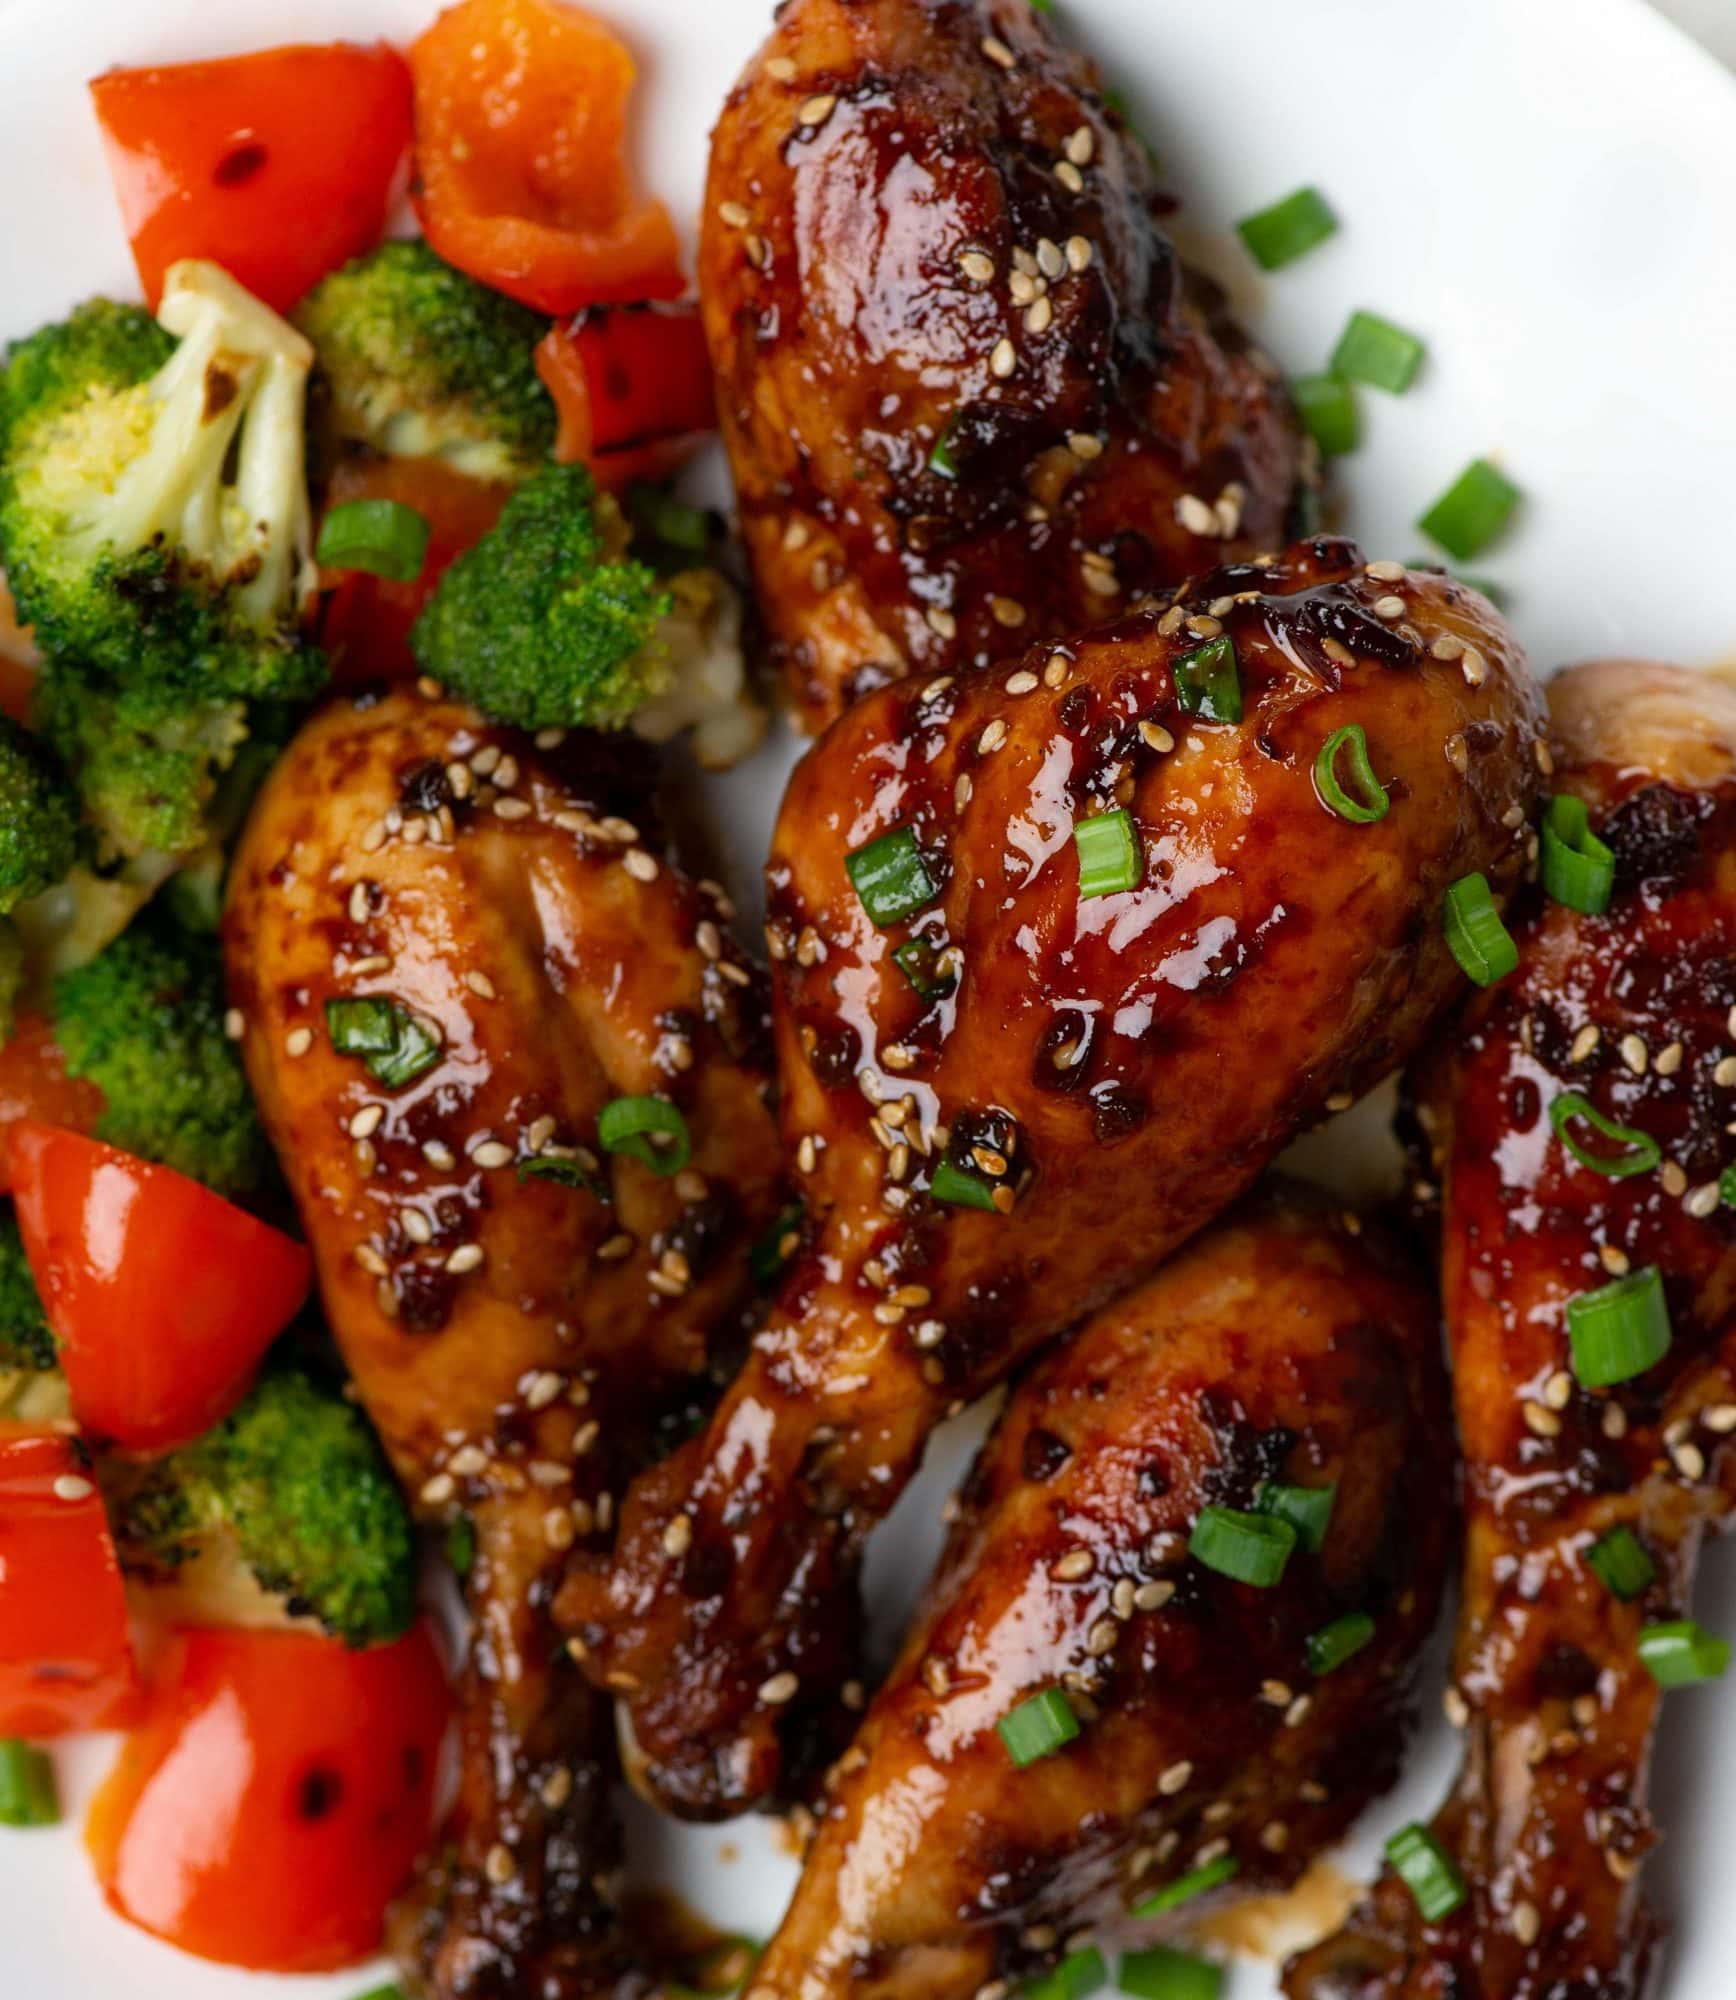 Close up of Honey soy baked chicken drumsticks garnished with green onion slices. Served with roasted broccoli and bell pepper.